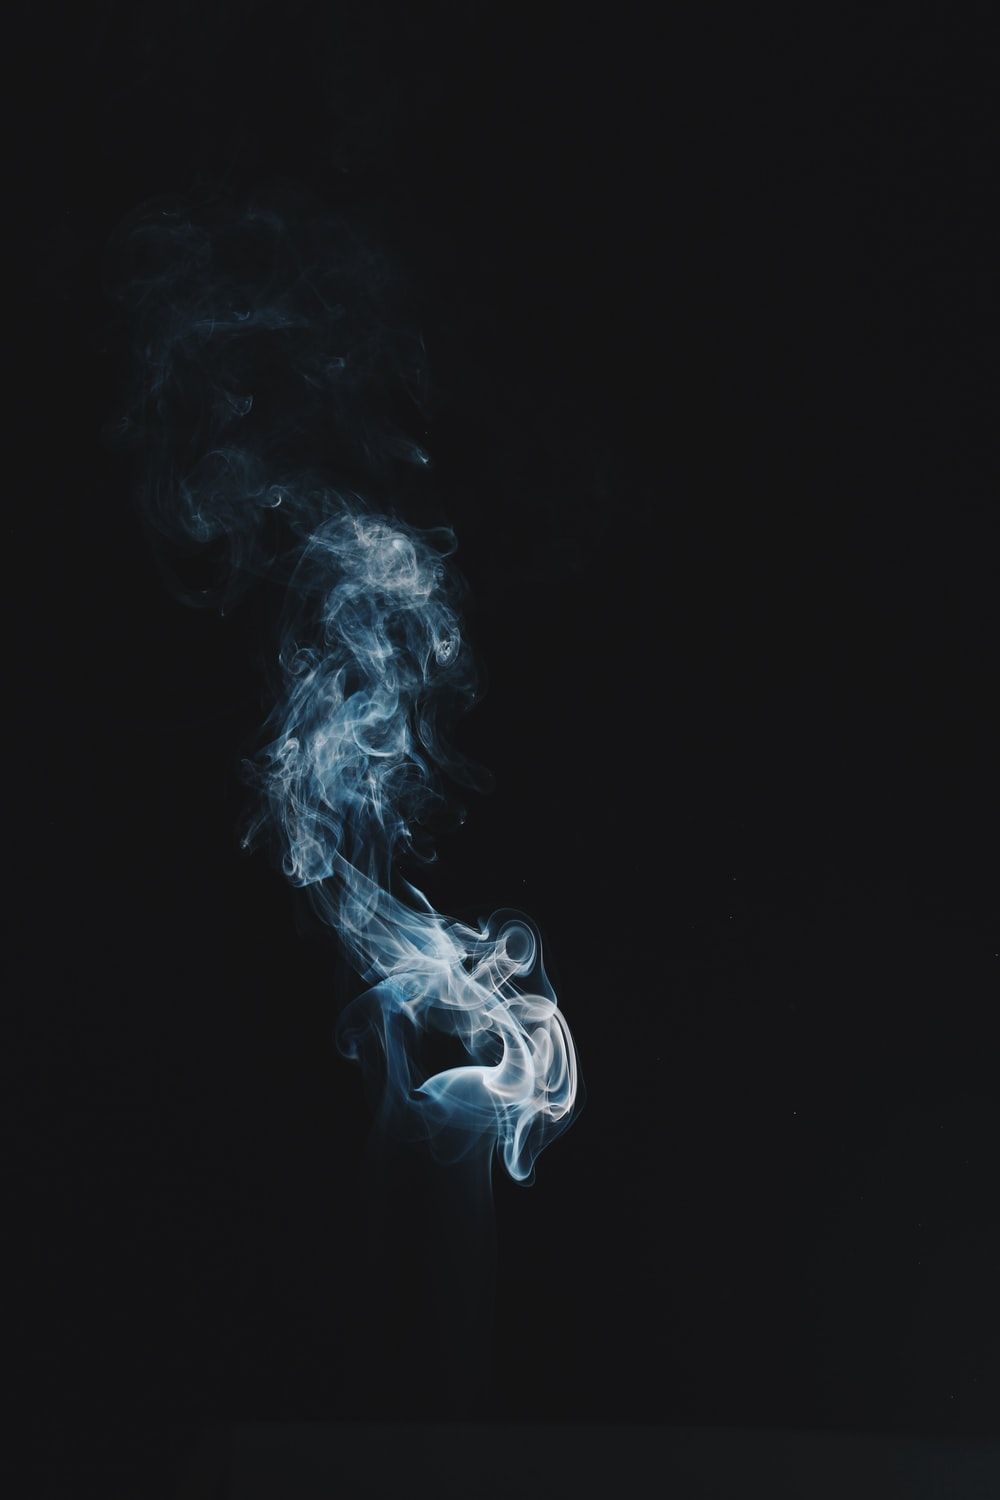 900+ Smoke Backgrounds Image: Download HD Backgrounds